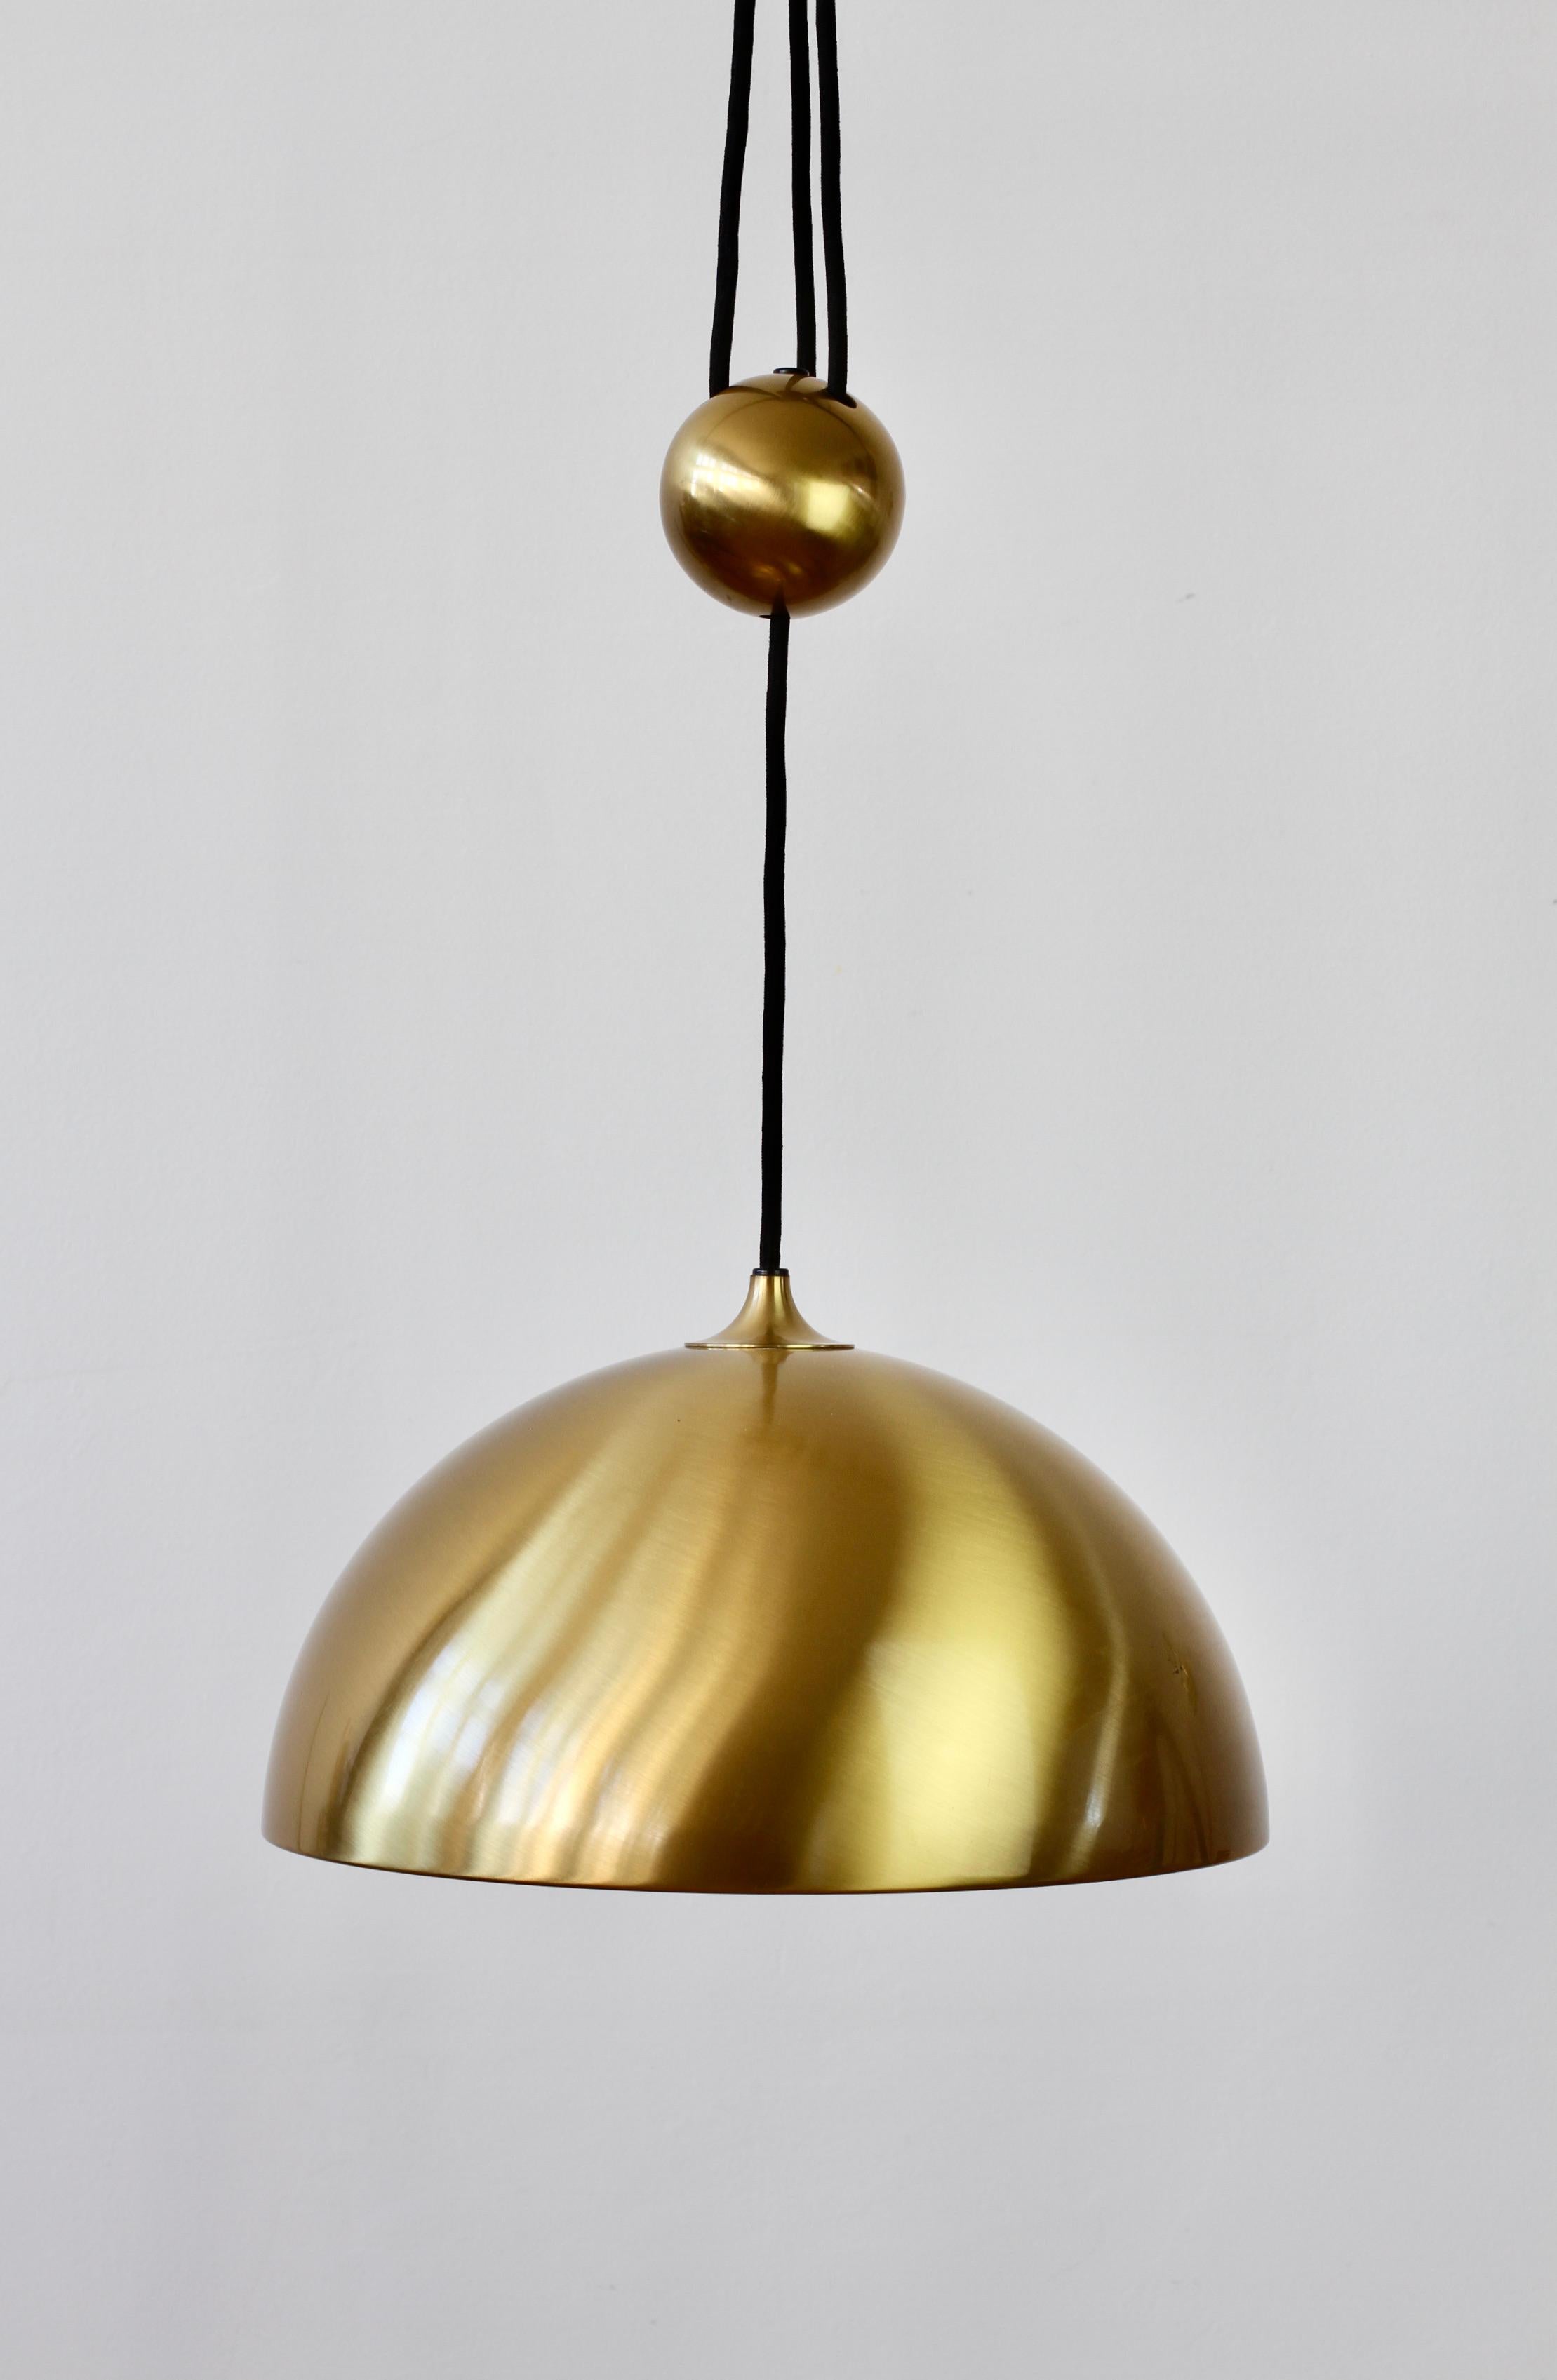 Elegant Mid-Century Modern vintage German made large brushed brass adjustable counterweight hanging pendant light or lamp model 'Duos' designed by Florian Schulz circa early 1970s. Featuring brushed lacquered brass and is height adjustable via the